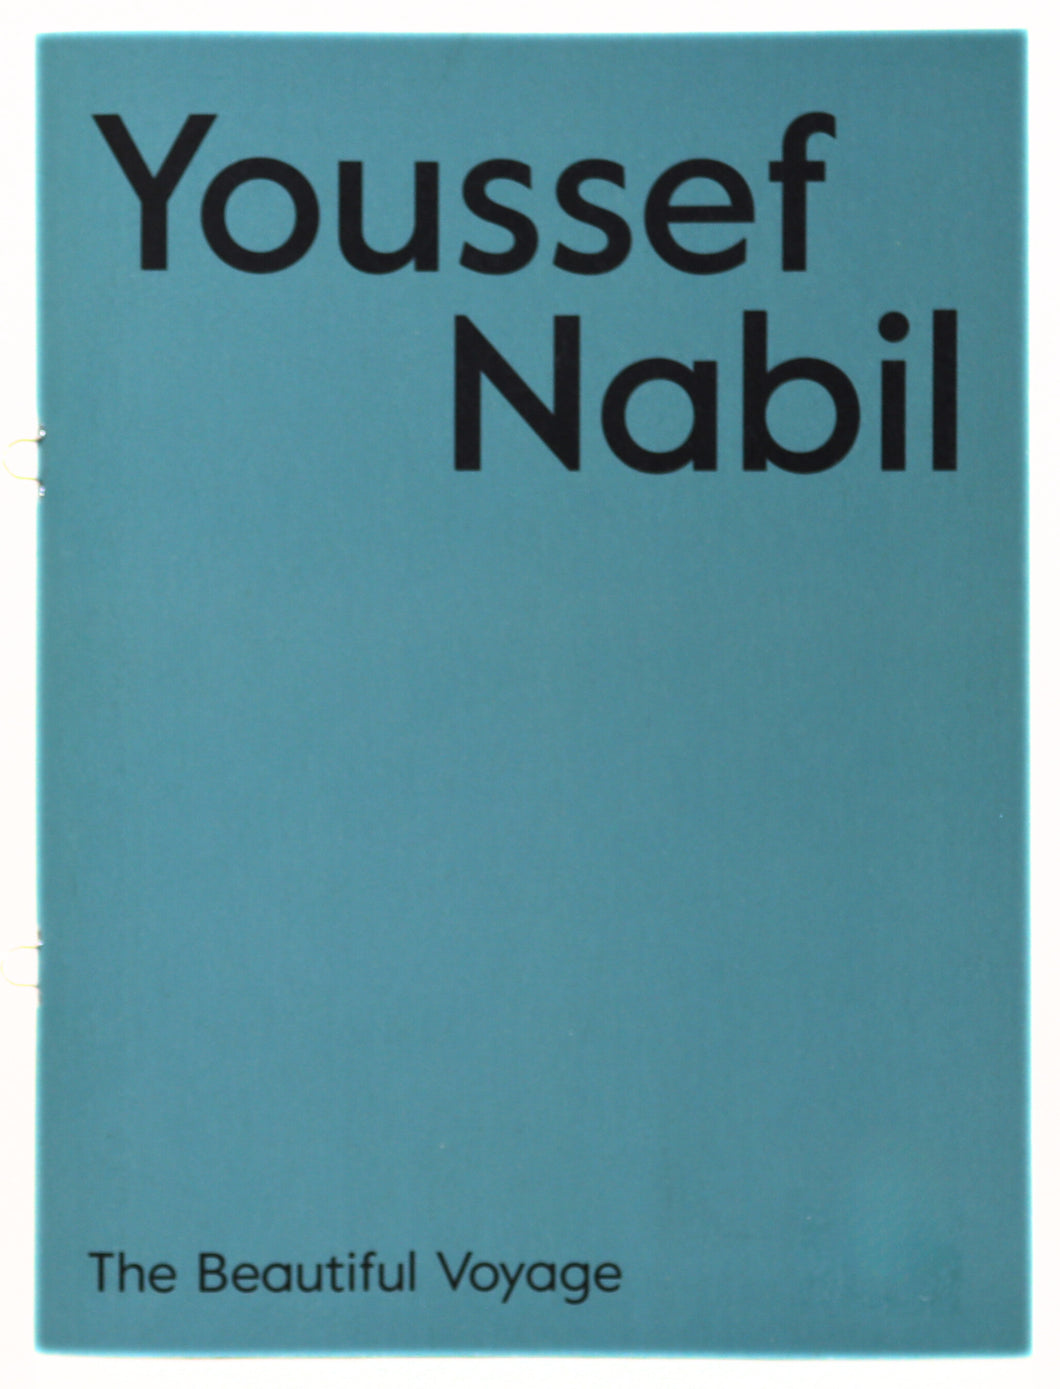 YOUSSEF NABIL, The Beautiful Voyage